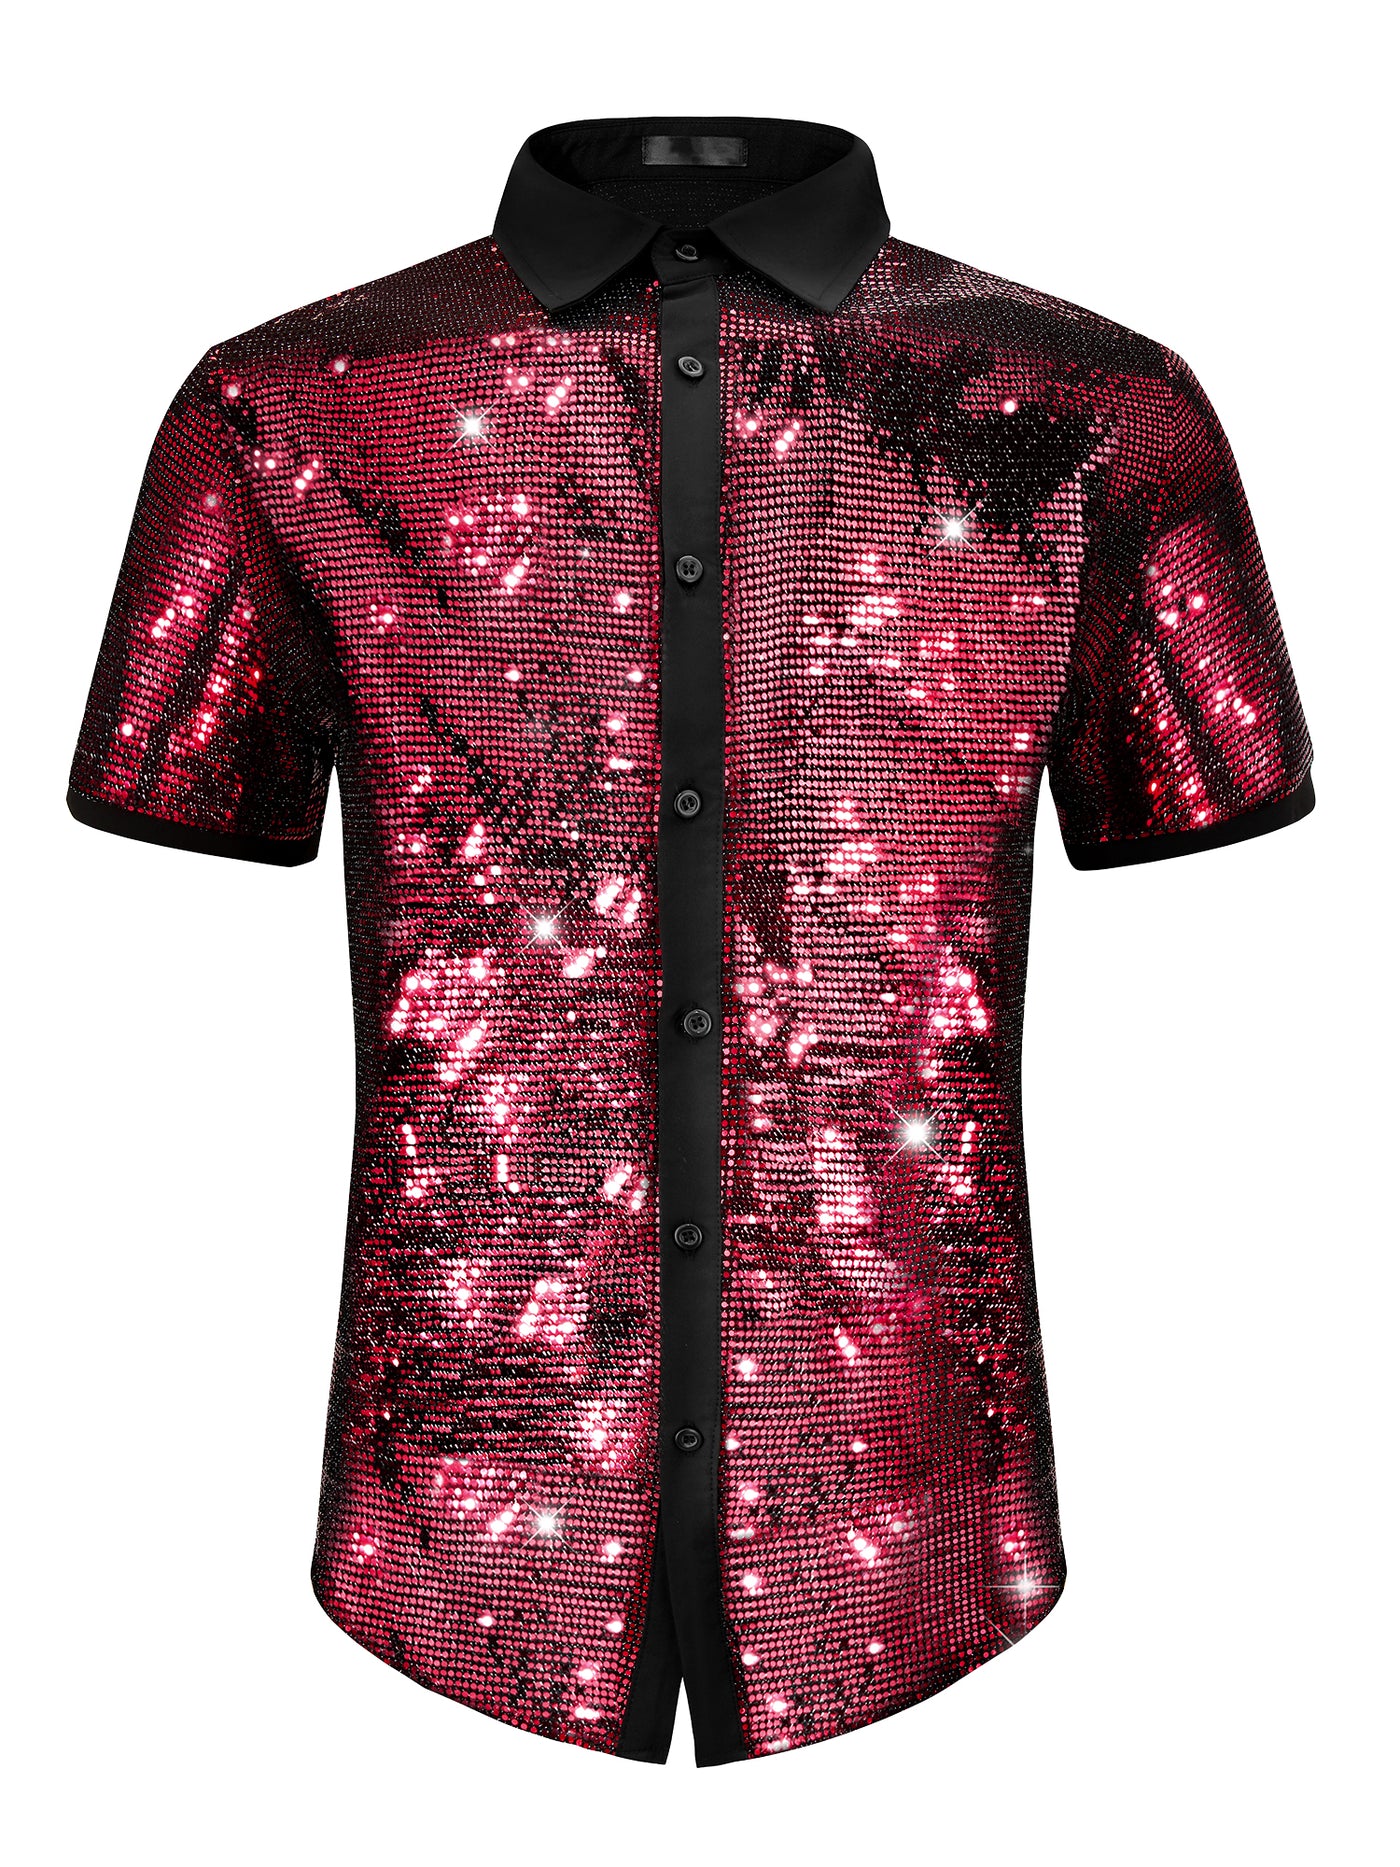 Bublédon Sequins Shirts for Men's Contrasting Color Short Sleeves Disco Party Sparkly Shirt